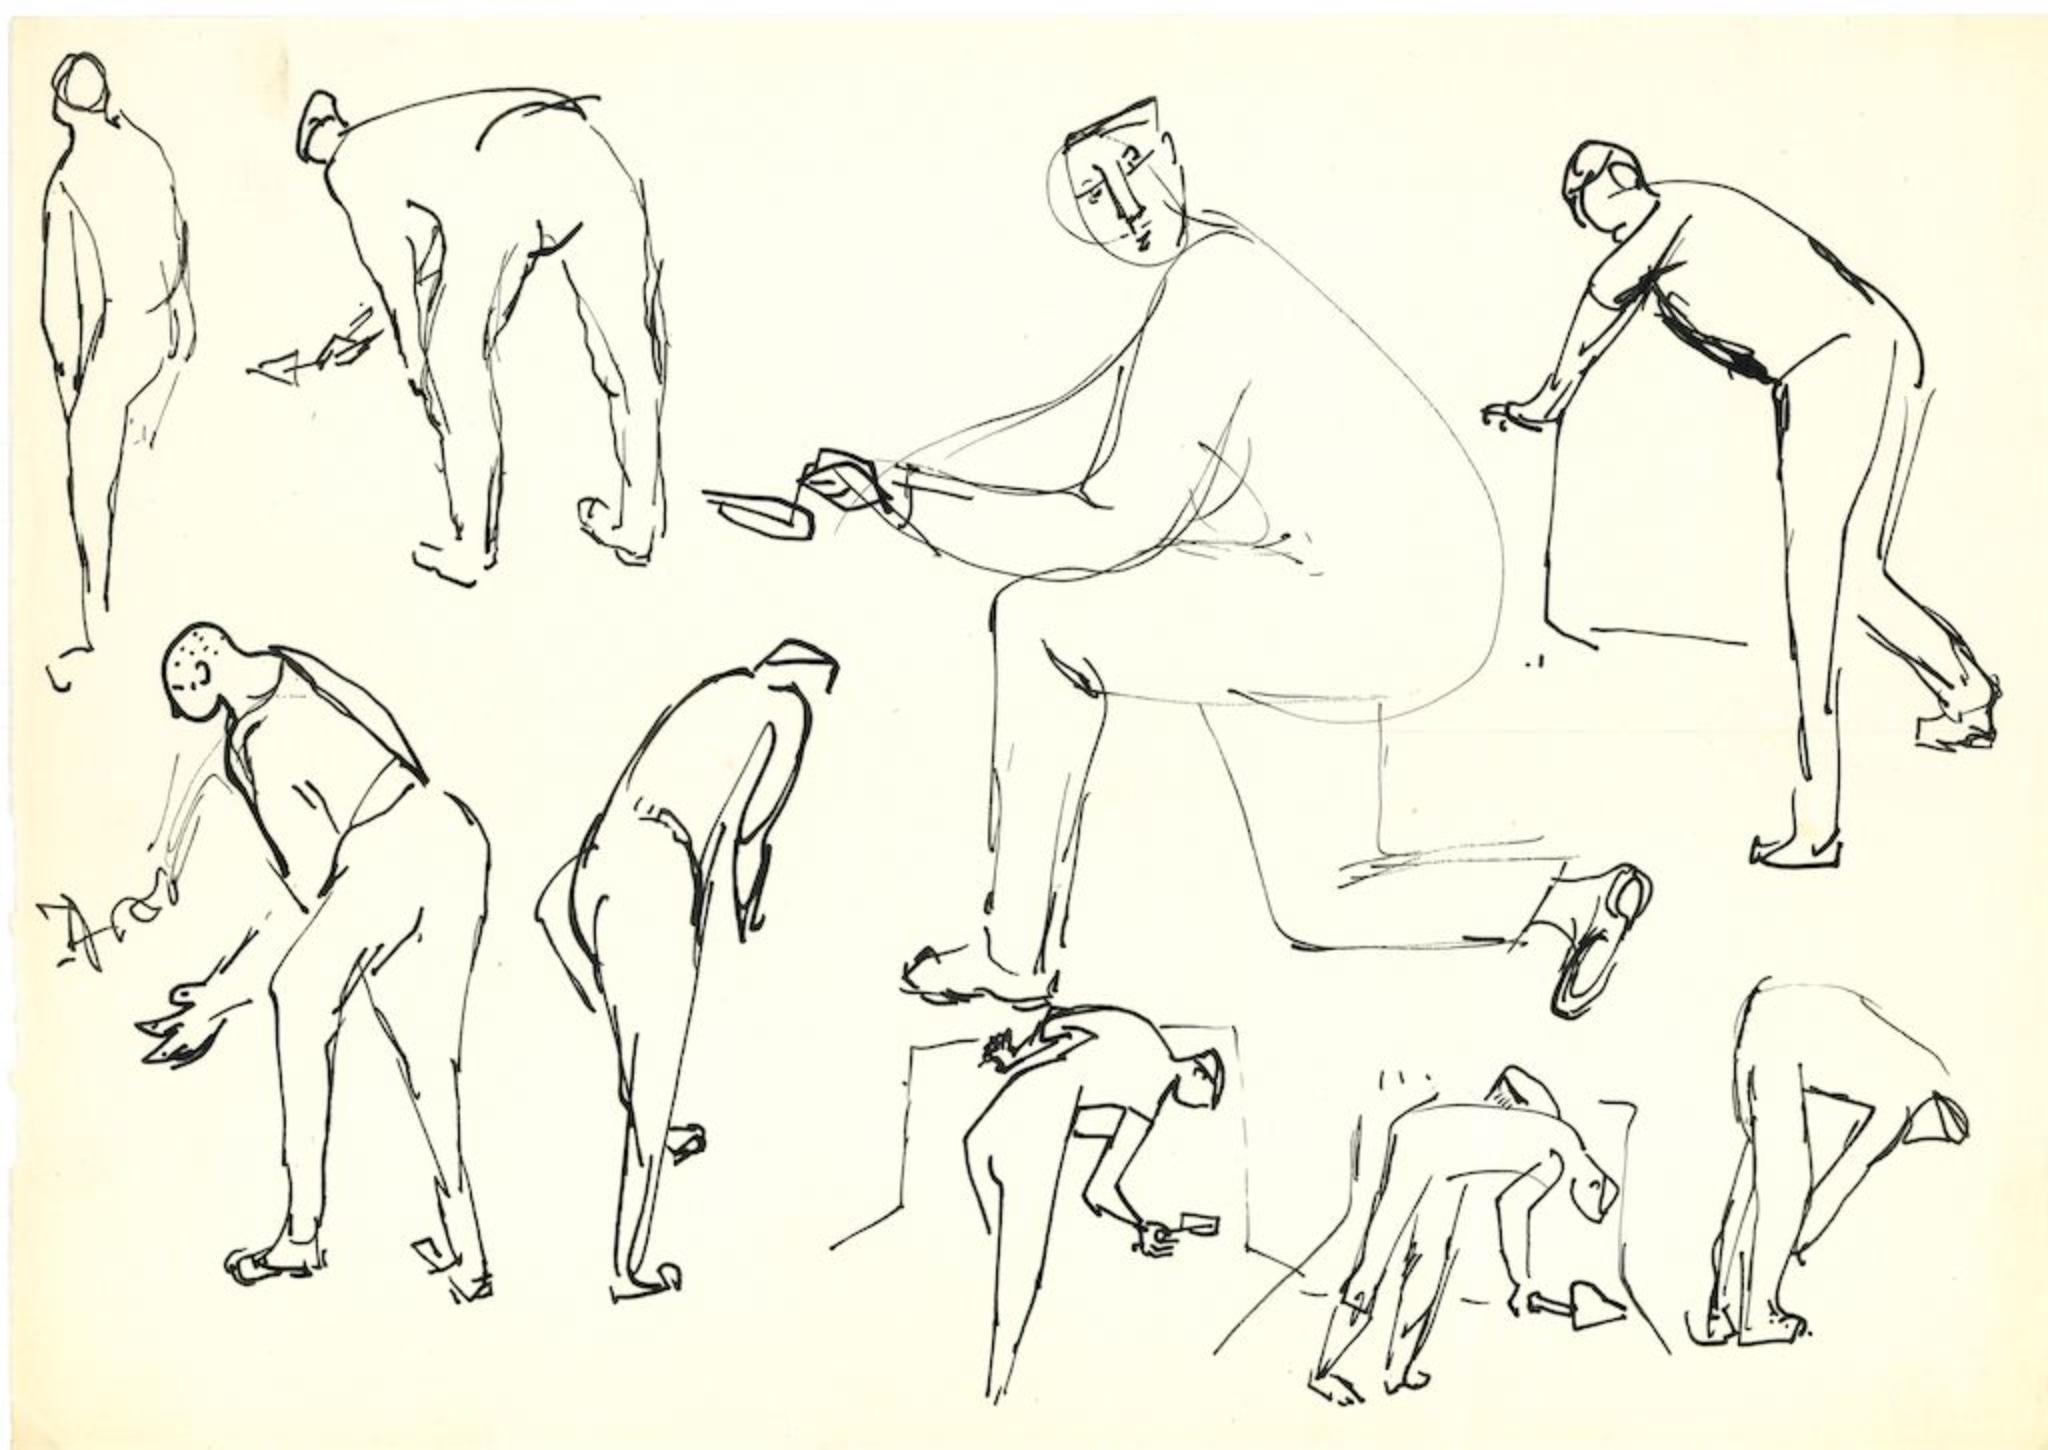 Figures - Labor Study is a drawing in China ink on paper, realized by Herta Hausmann.

Atelier stamp on the lower left corner on the rear.

Very good conditions.

The artwork represents figures in various labor, through deft strokes, movement and